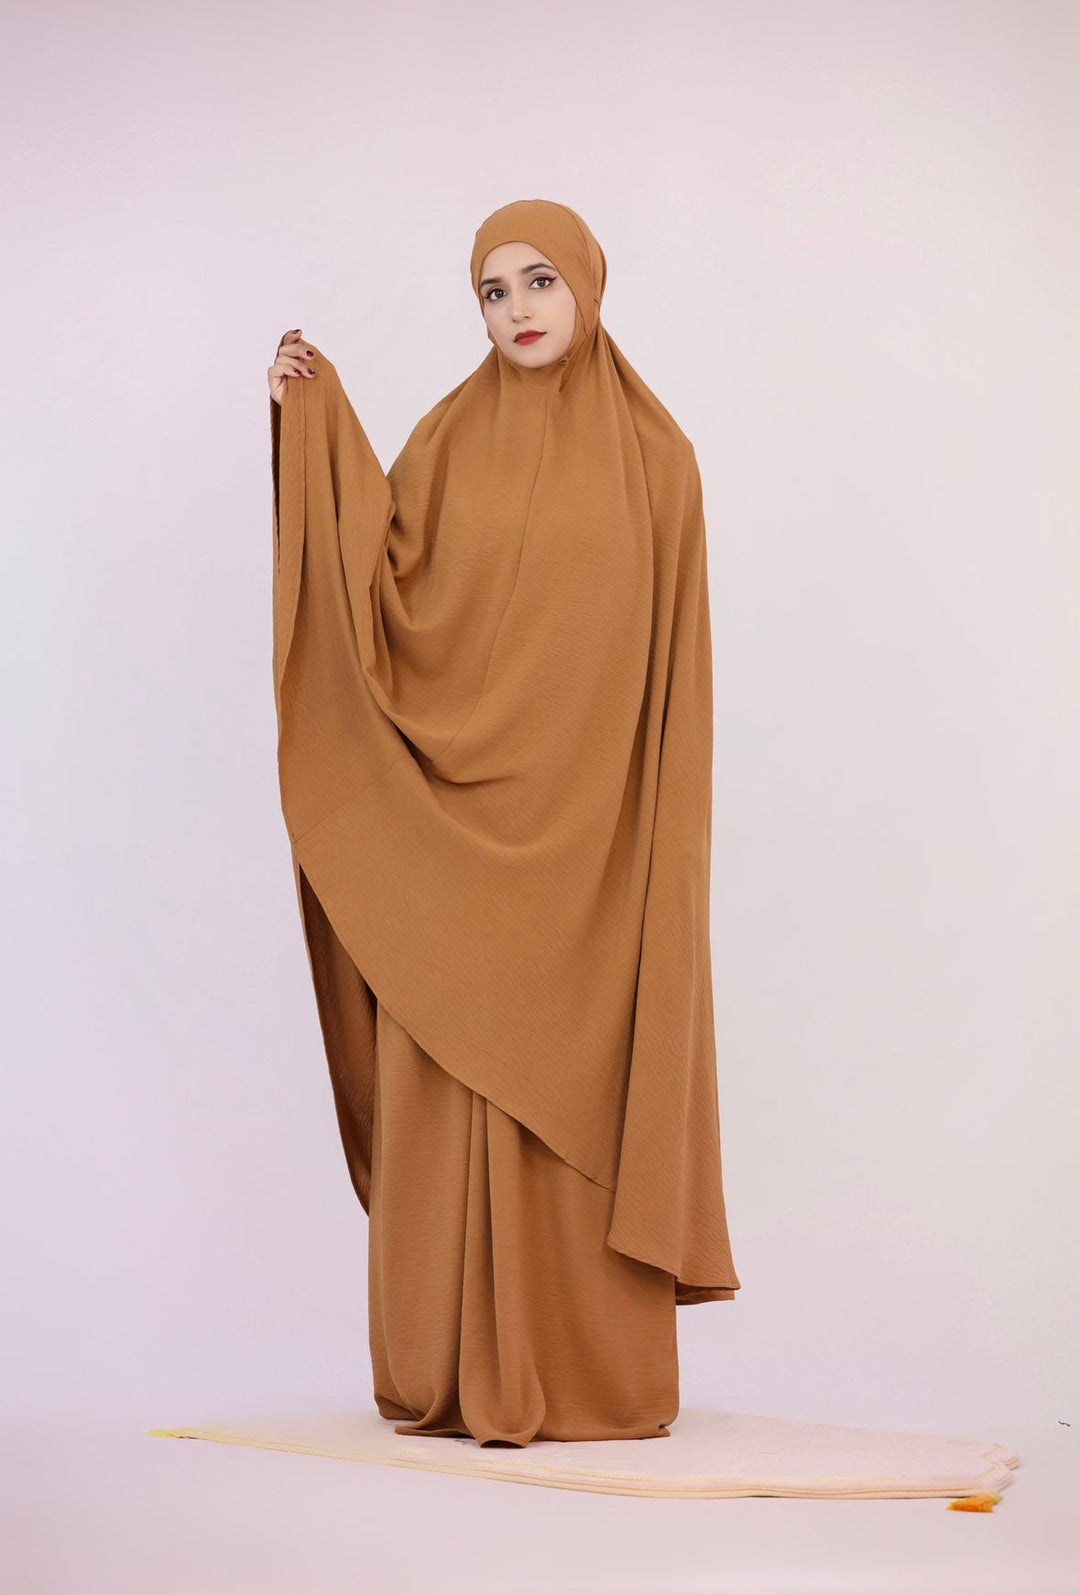 Get trendy with Textured Prayer Set - Camel - Skirts available at Voilee NY. Grab yours for $55 today!